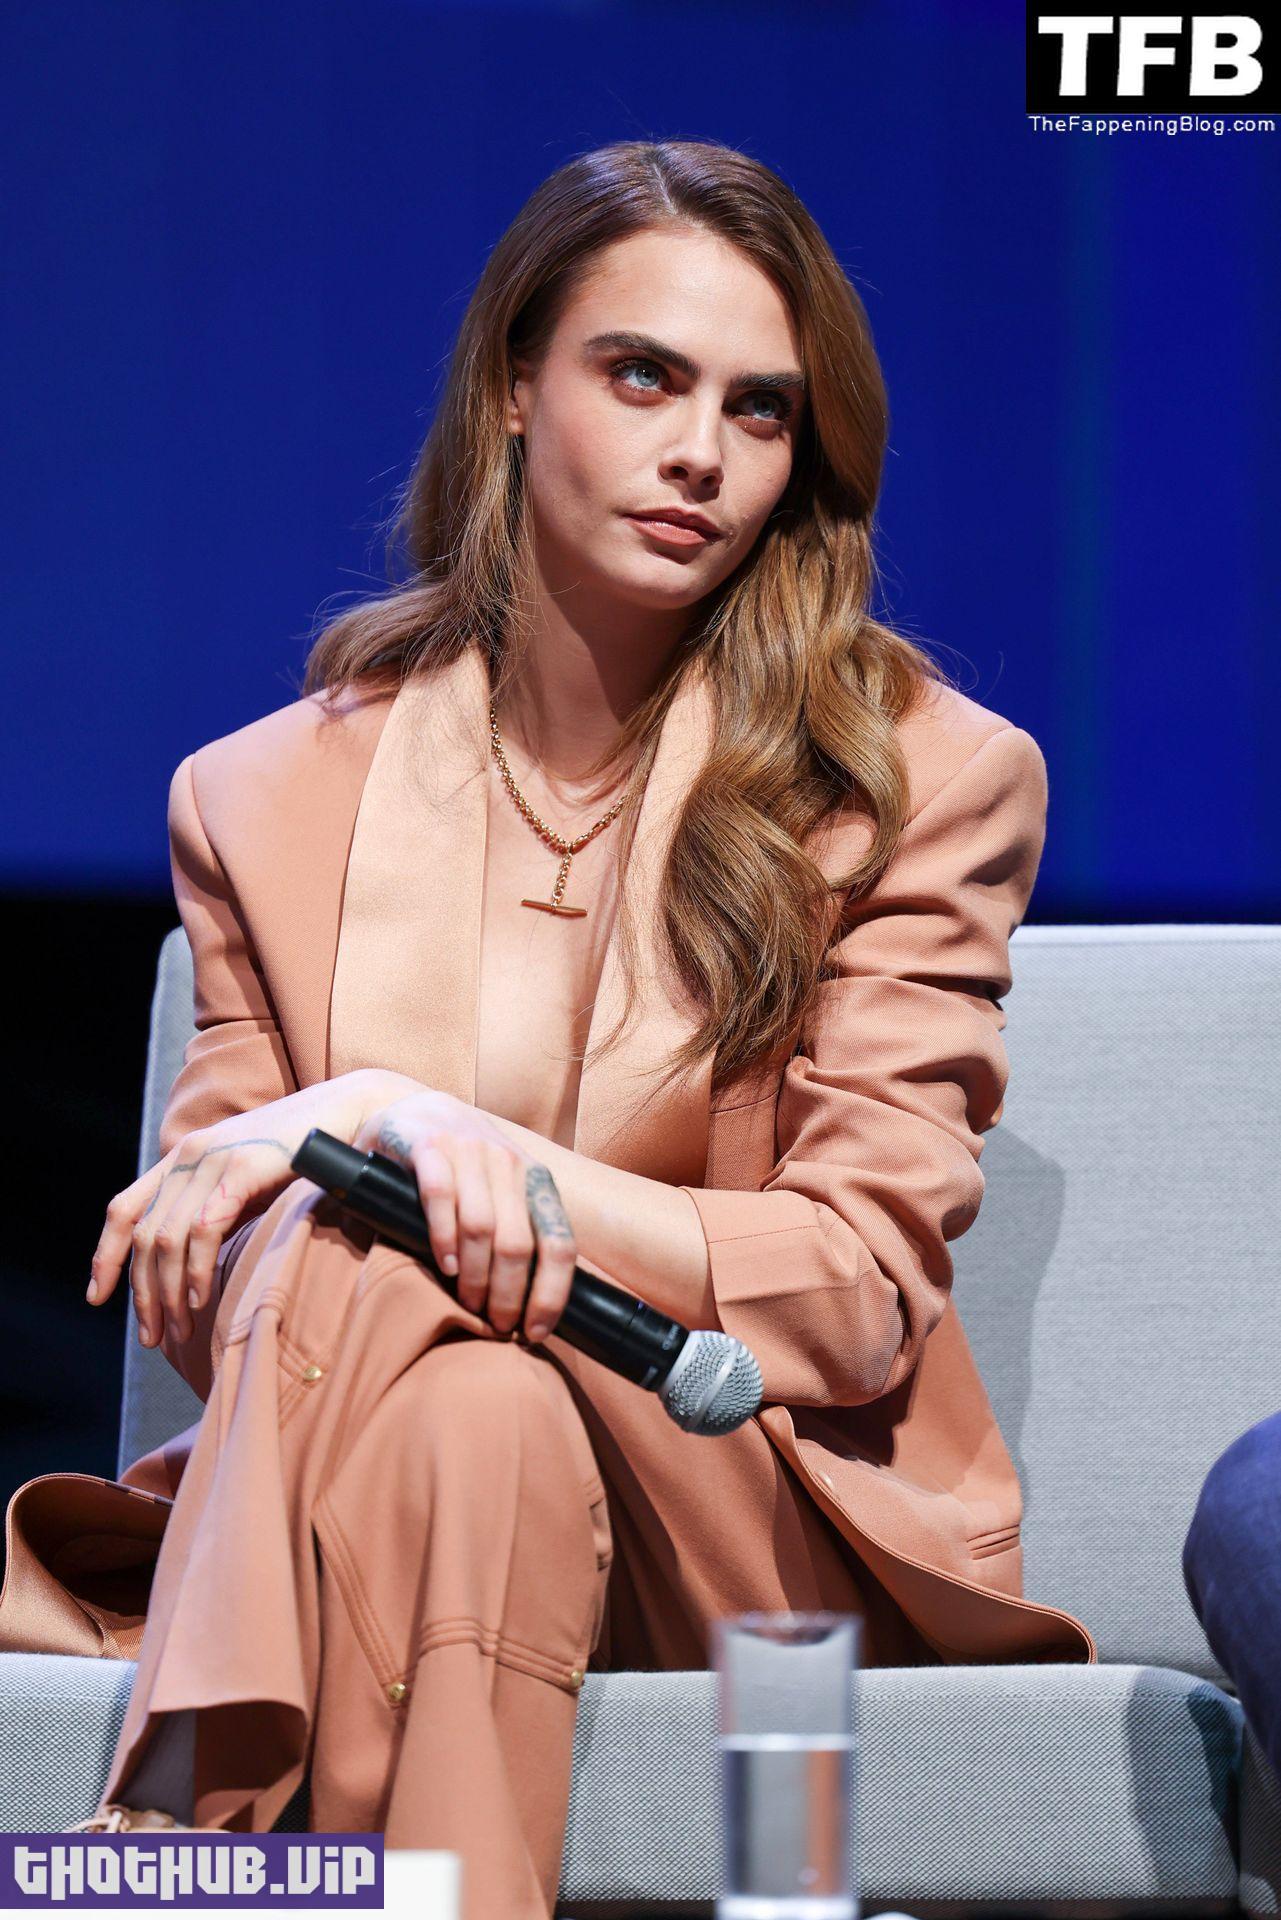 Cara Delevingne Sexy The Fappening Blog 49 1